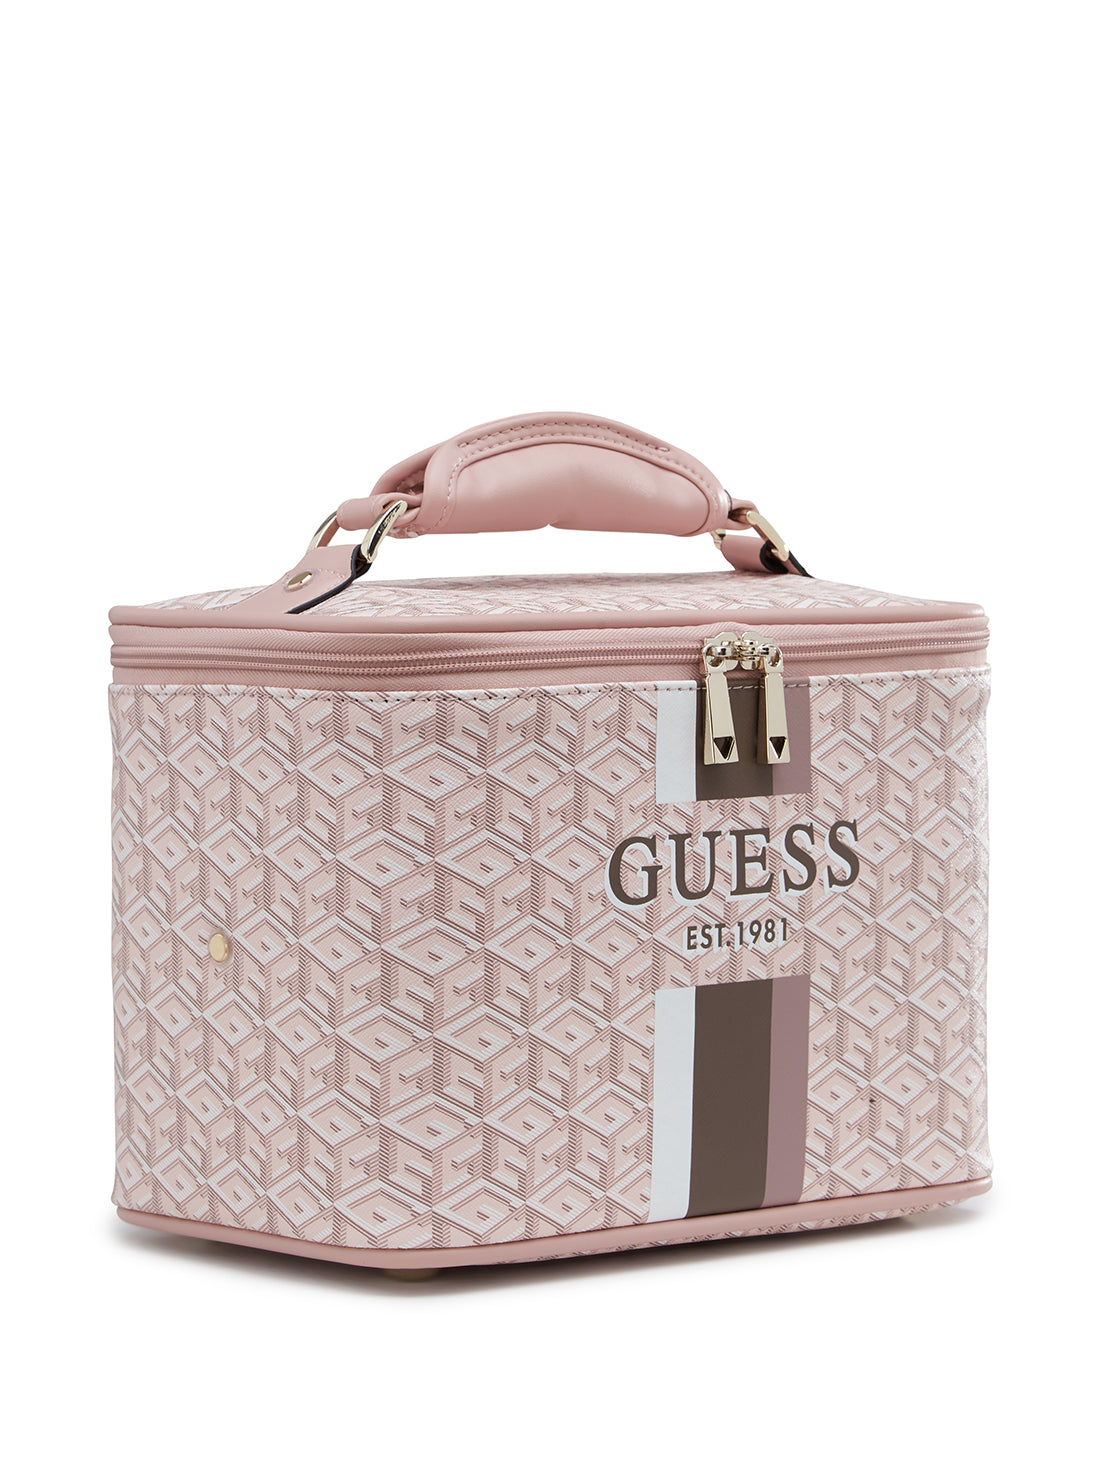 GUESS Women's Rose Logo Wilder Beauty Case S7452493 Angle View